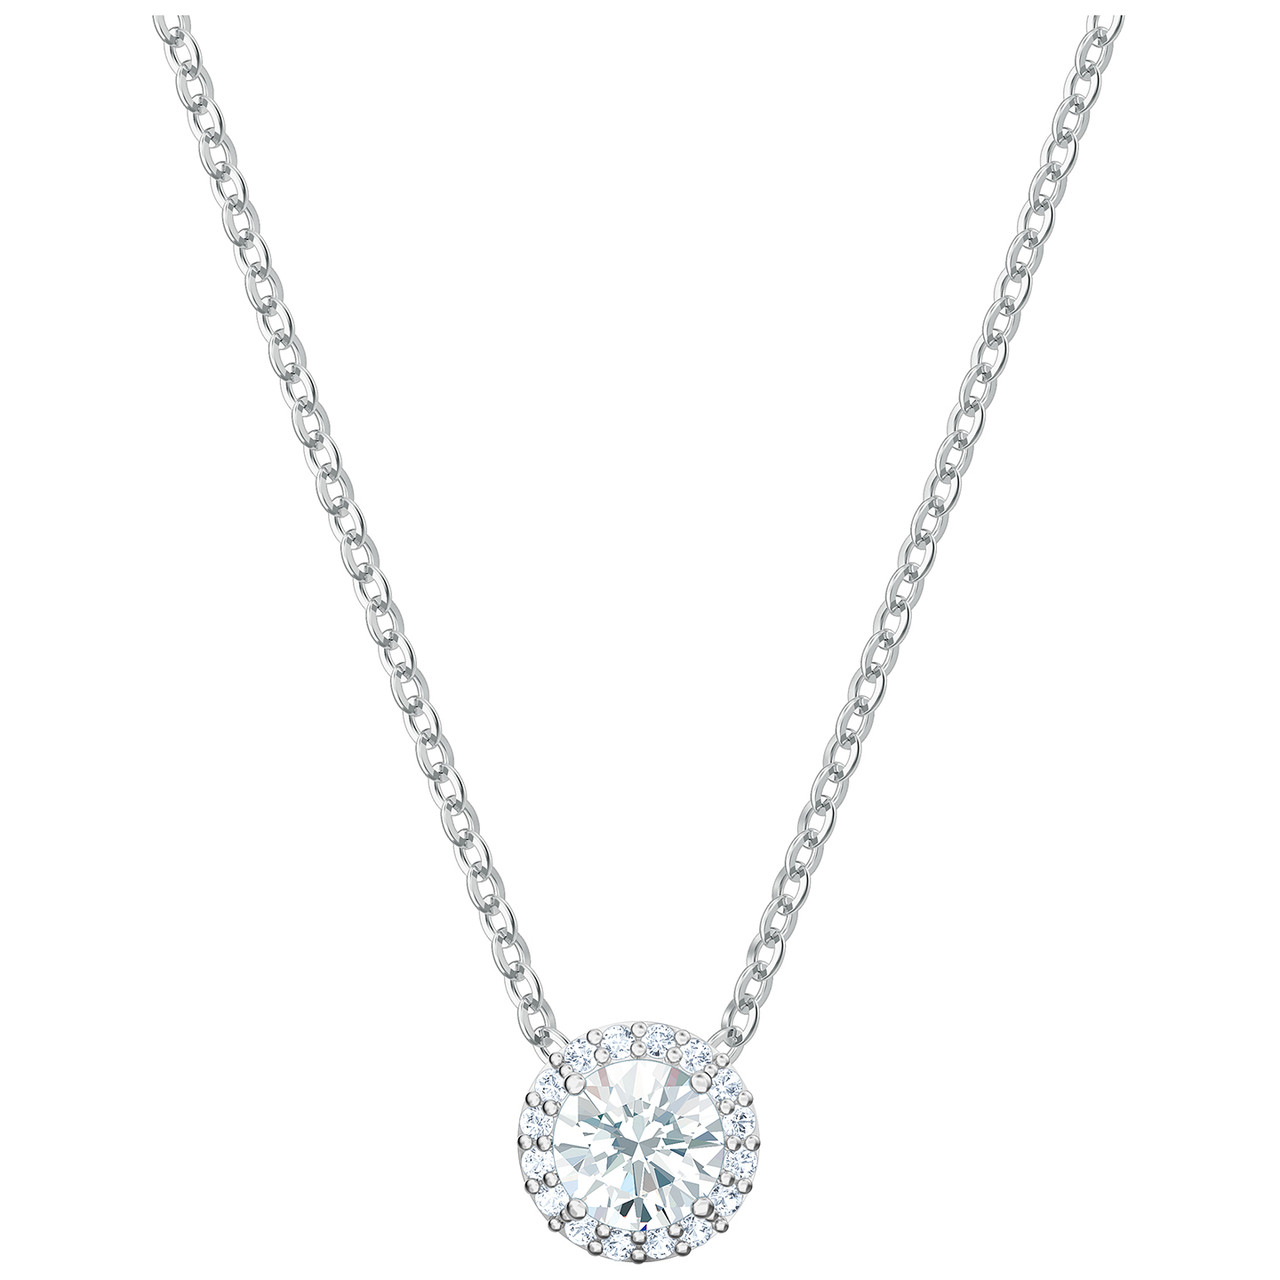 Swarovski Angelic Necklace, White, Rose-gold tone plated 5367845 -  Jewellery from Adrian & Co Jewellers UK